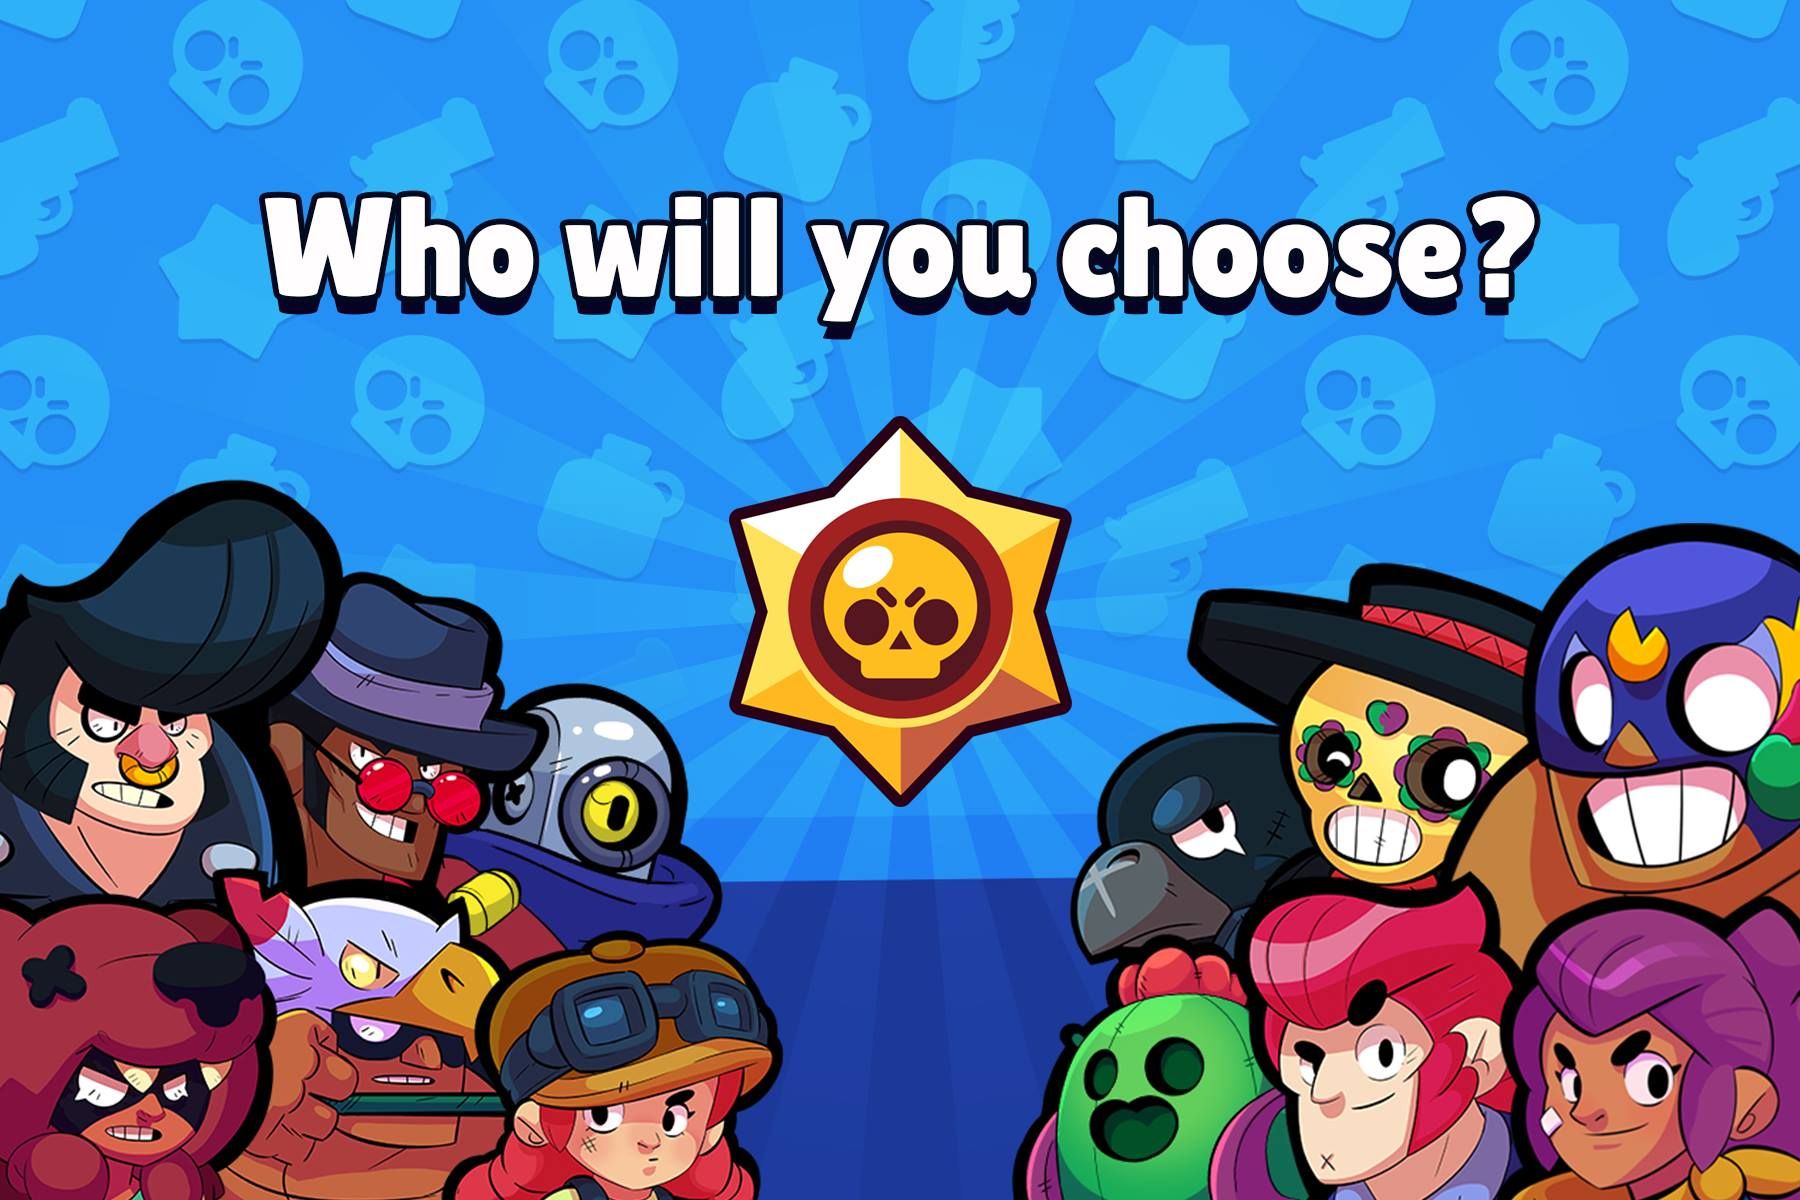 Clash Of Clans Developer Supercell Reveals New Game Brawl Stars - brawl stars supercell characters